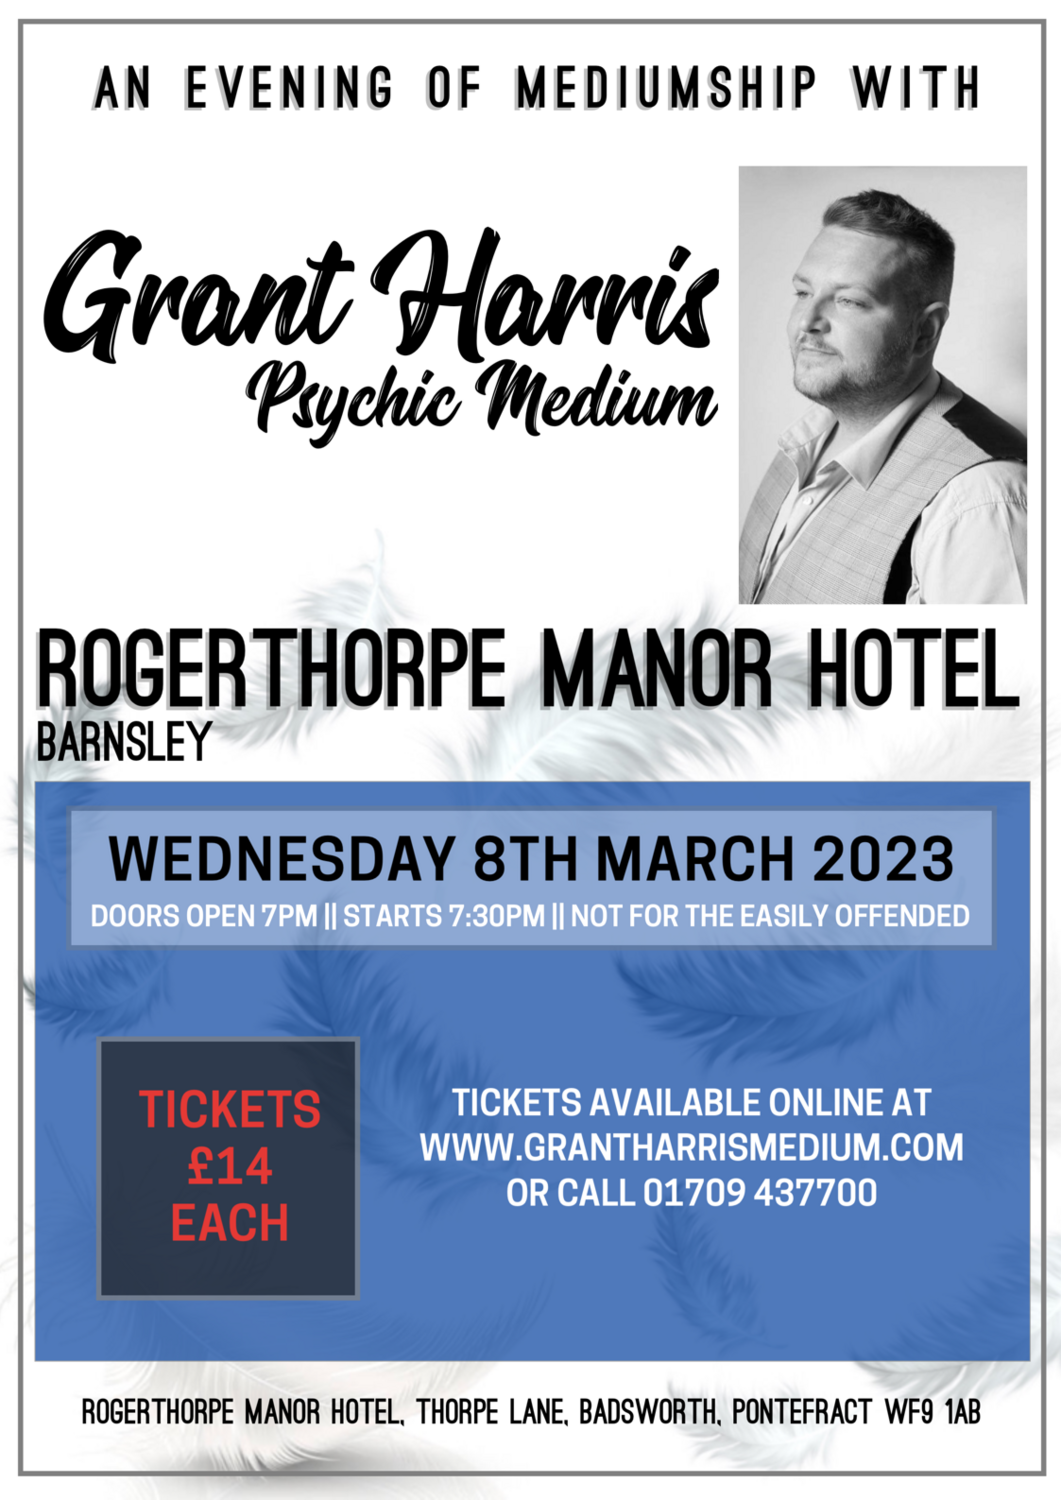 Rogerthorpe Manor Hotel, Pontefract, Wednesday 8th March 2023